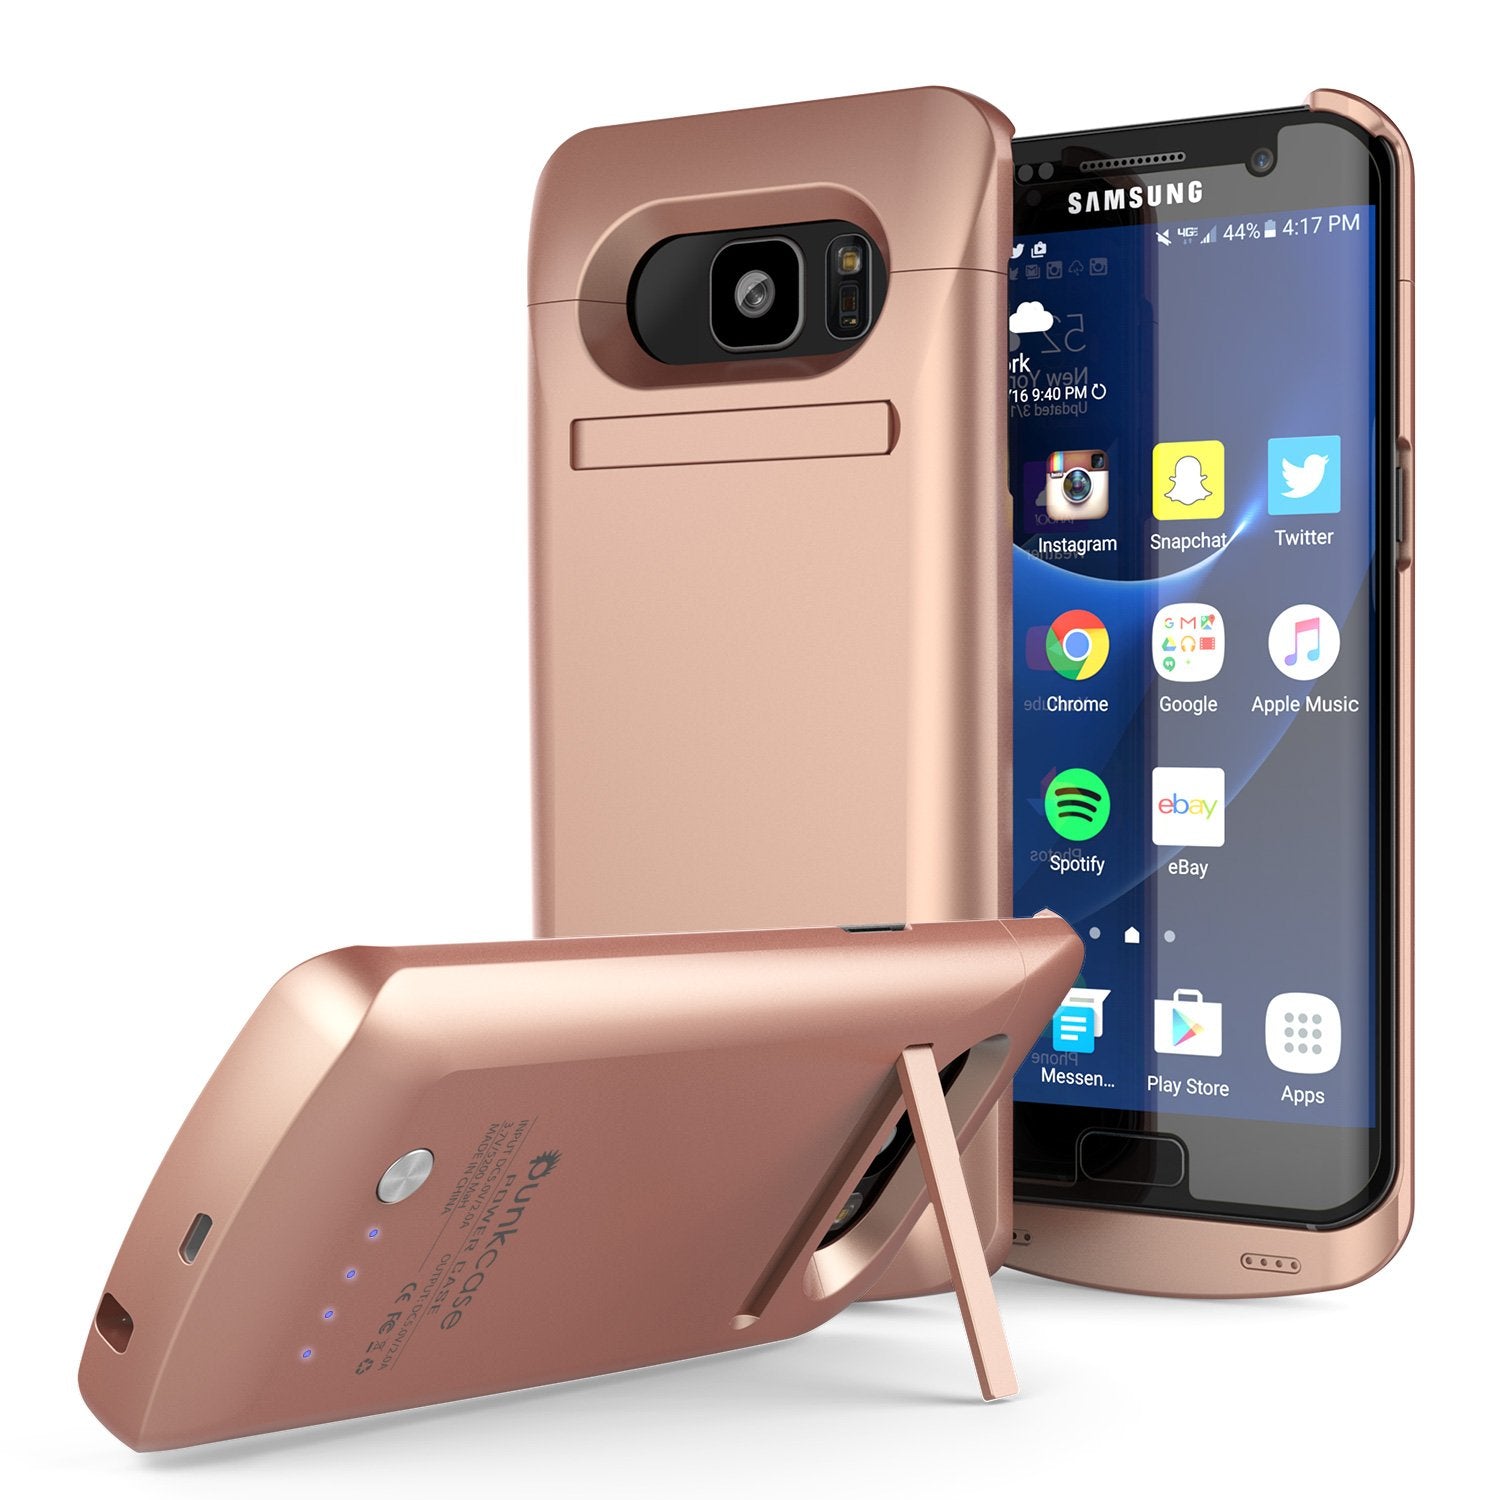 Galaxy S7 EDGE Battery Case, Punkcase 5200mAH Charger Rose Gold Case